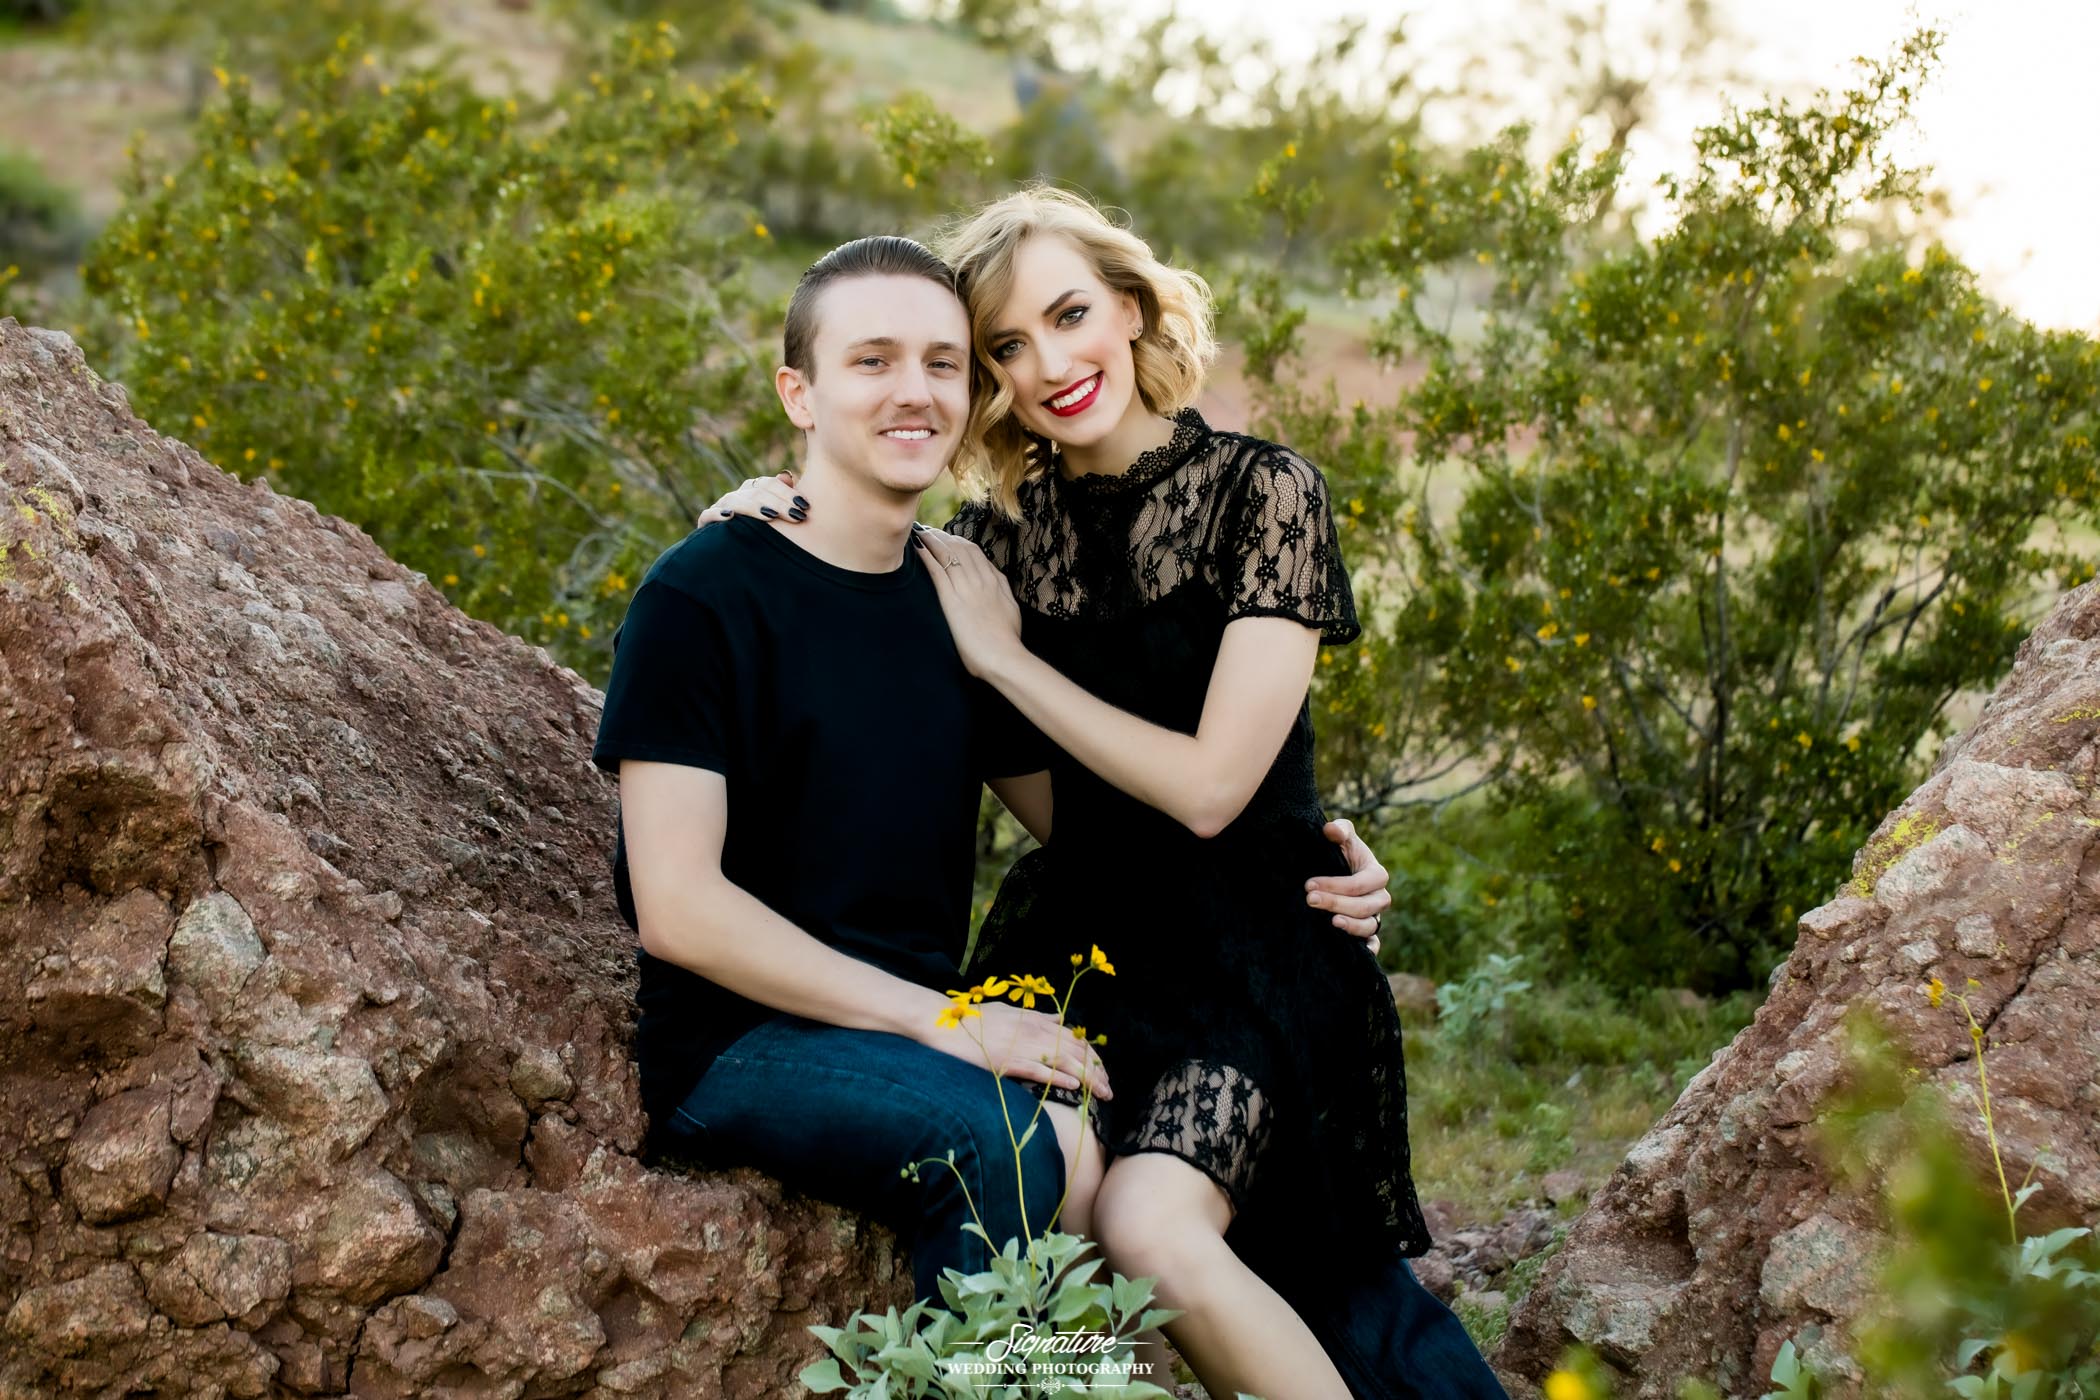 Couple sitting together on rock in desert